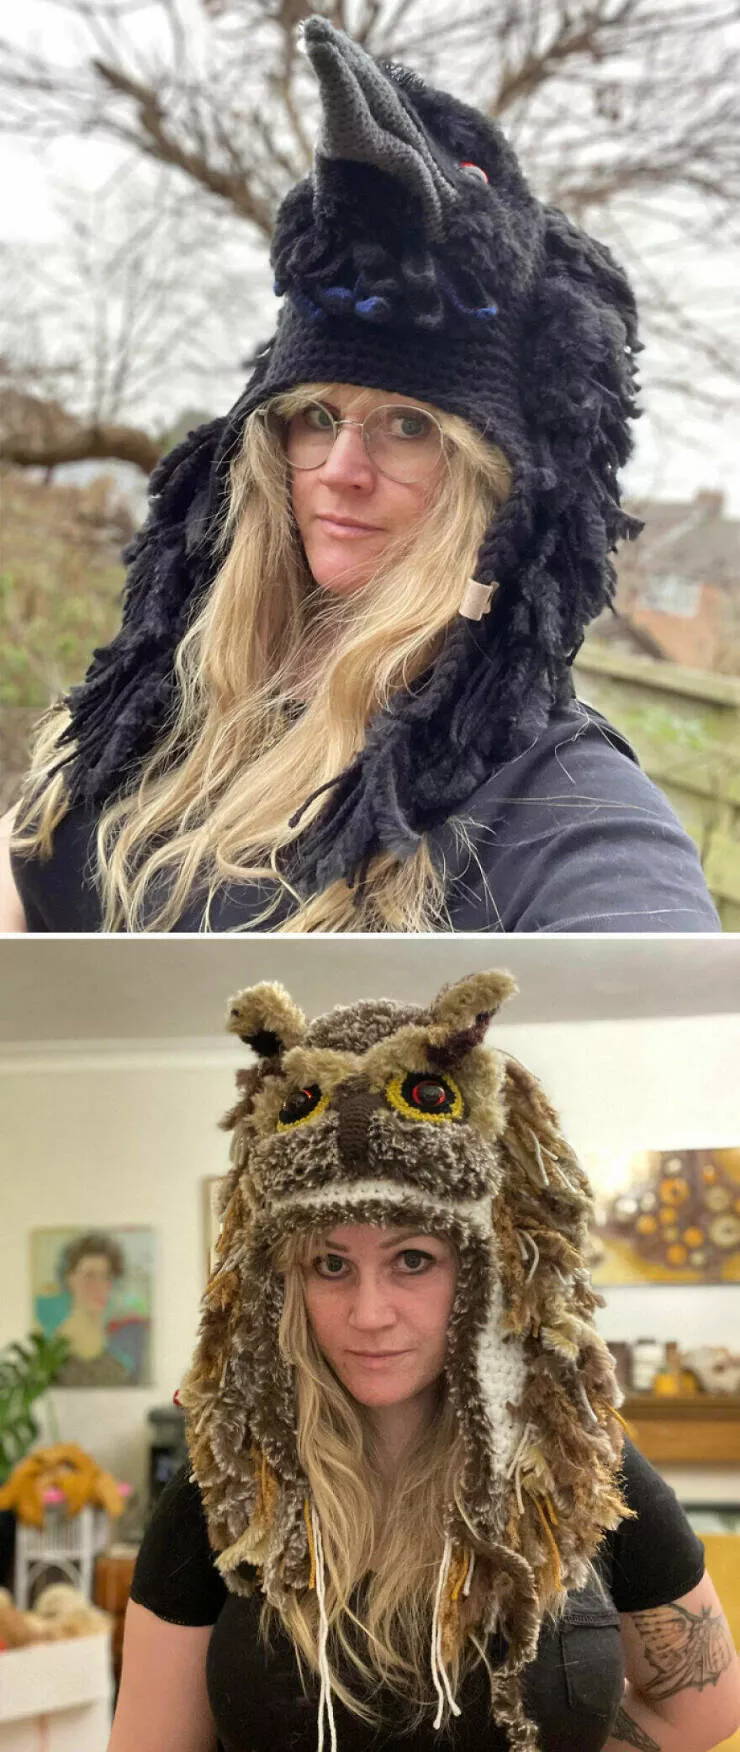 Crafty creations unveiling diy delights that steal the spotlight - #14 Ive Been Crocheting Bird Hats. Heres The First 2. A Raven And An Owl. Im Really Tempted To Try A Cockatoo.